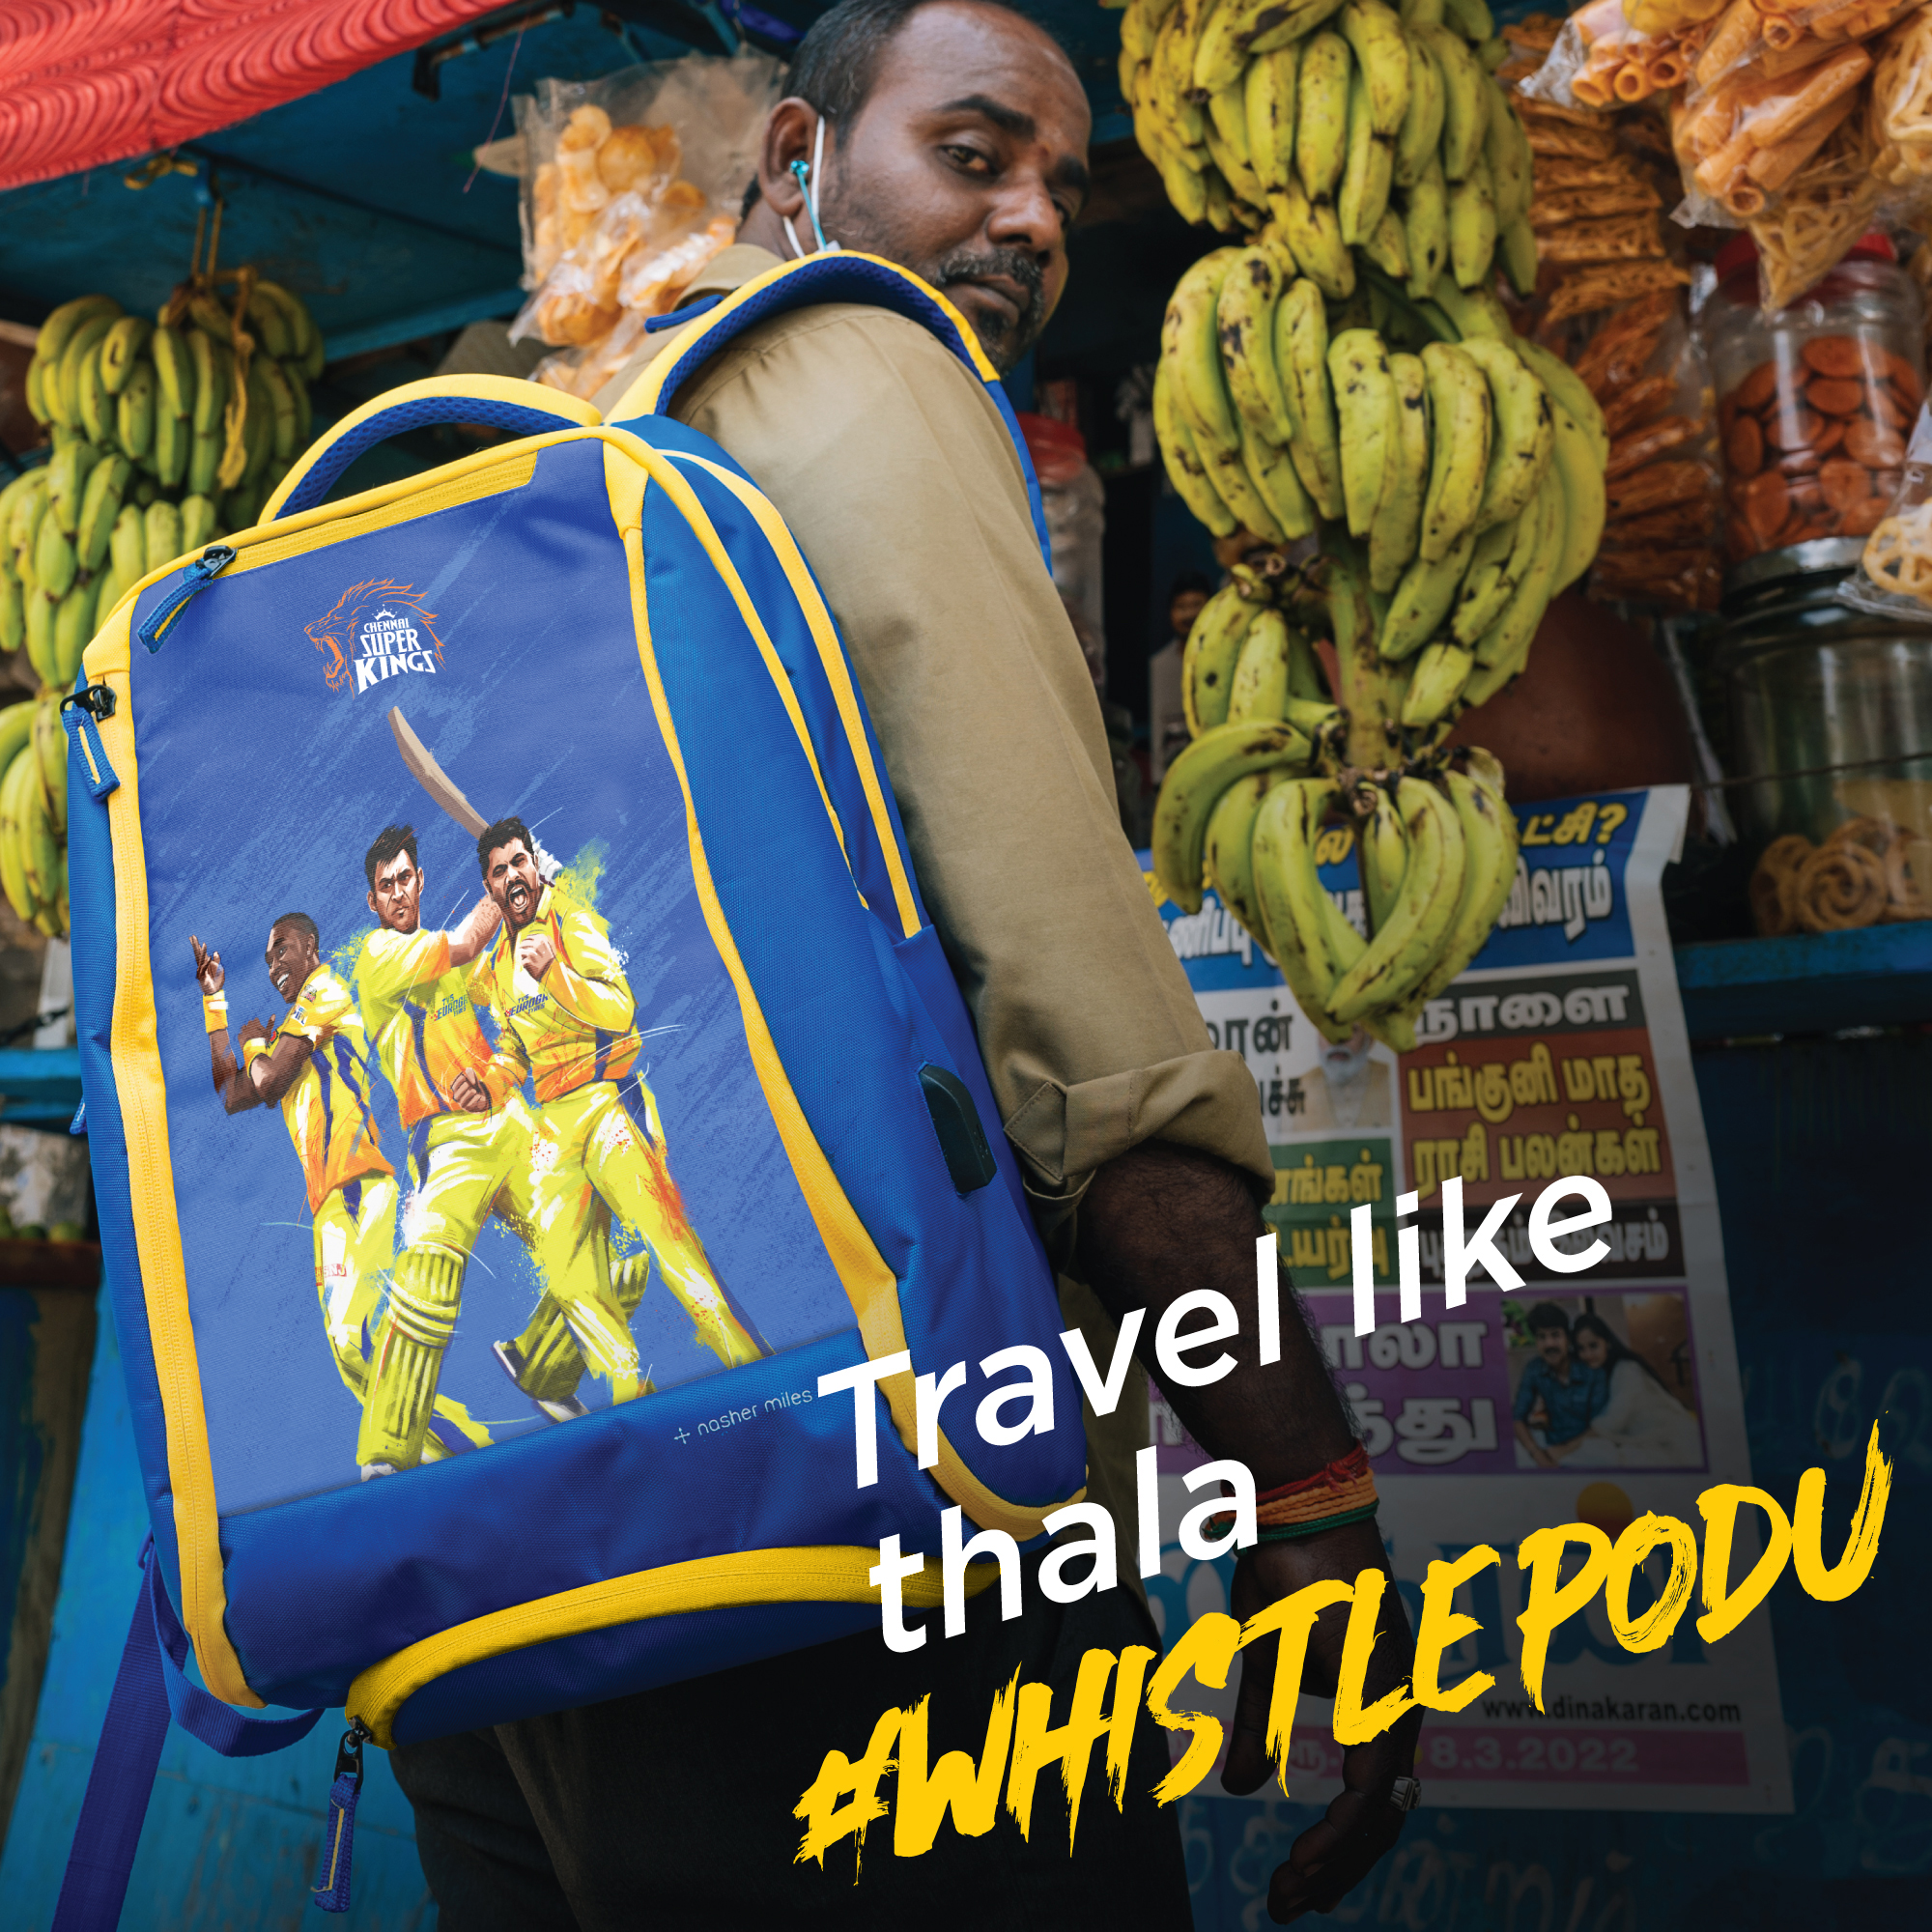 CSK Players Backpack